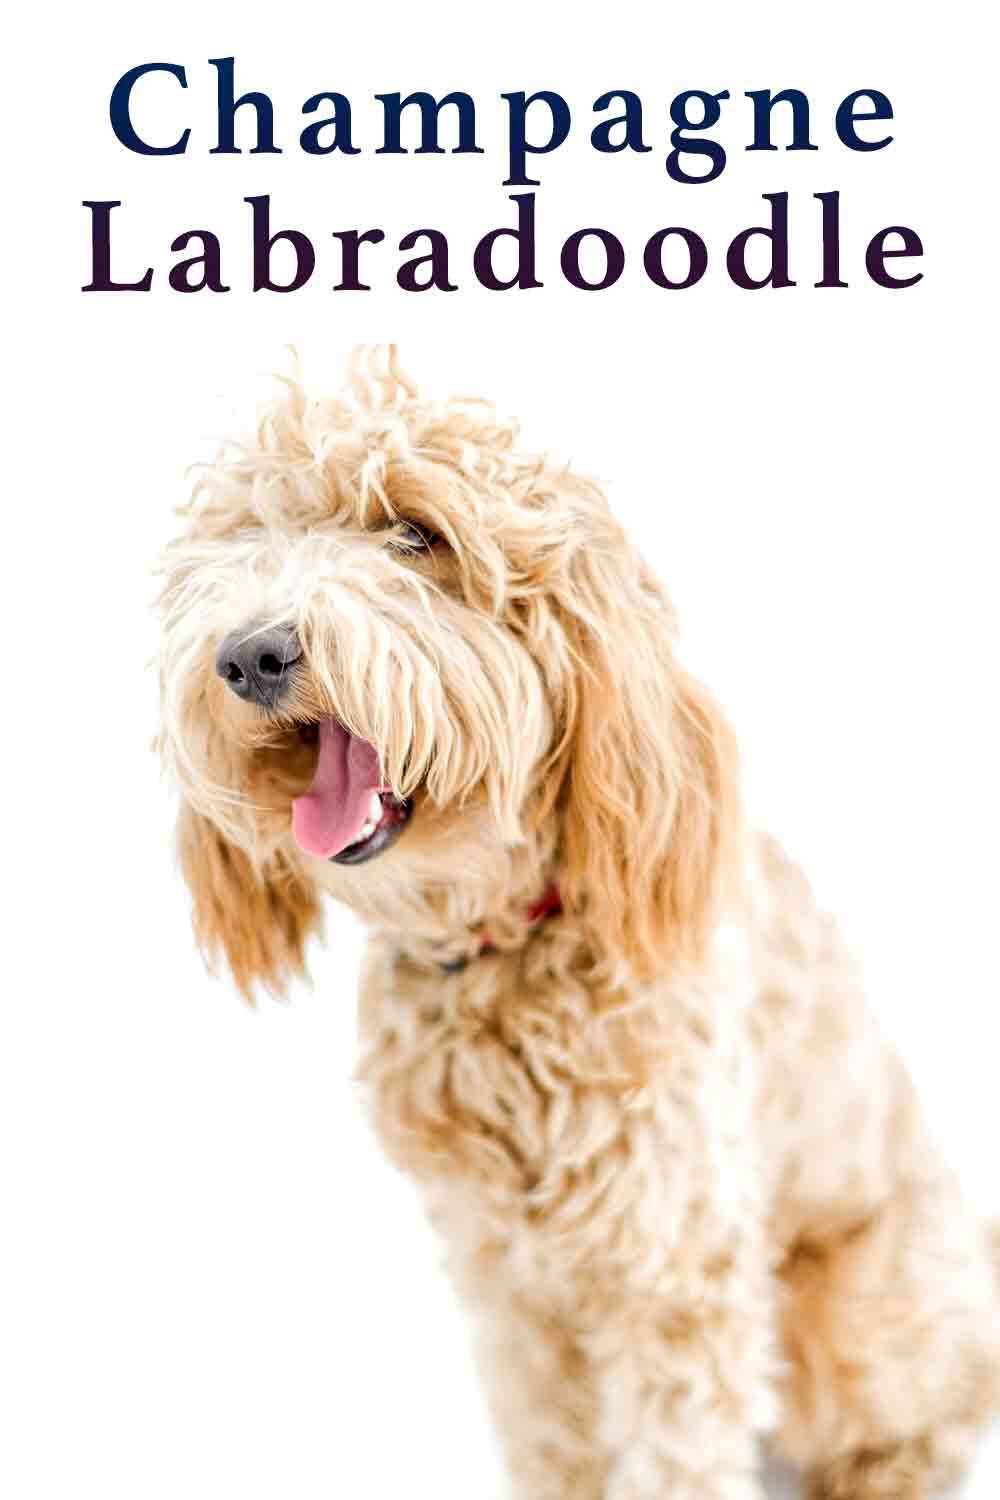 champagne labradoodle